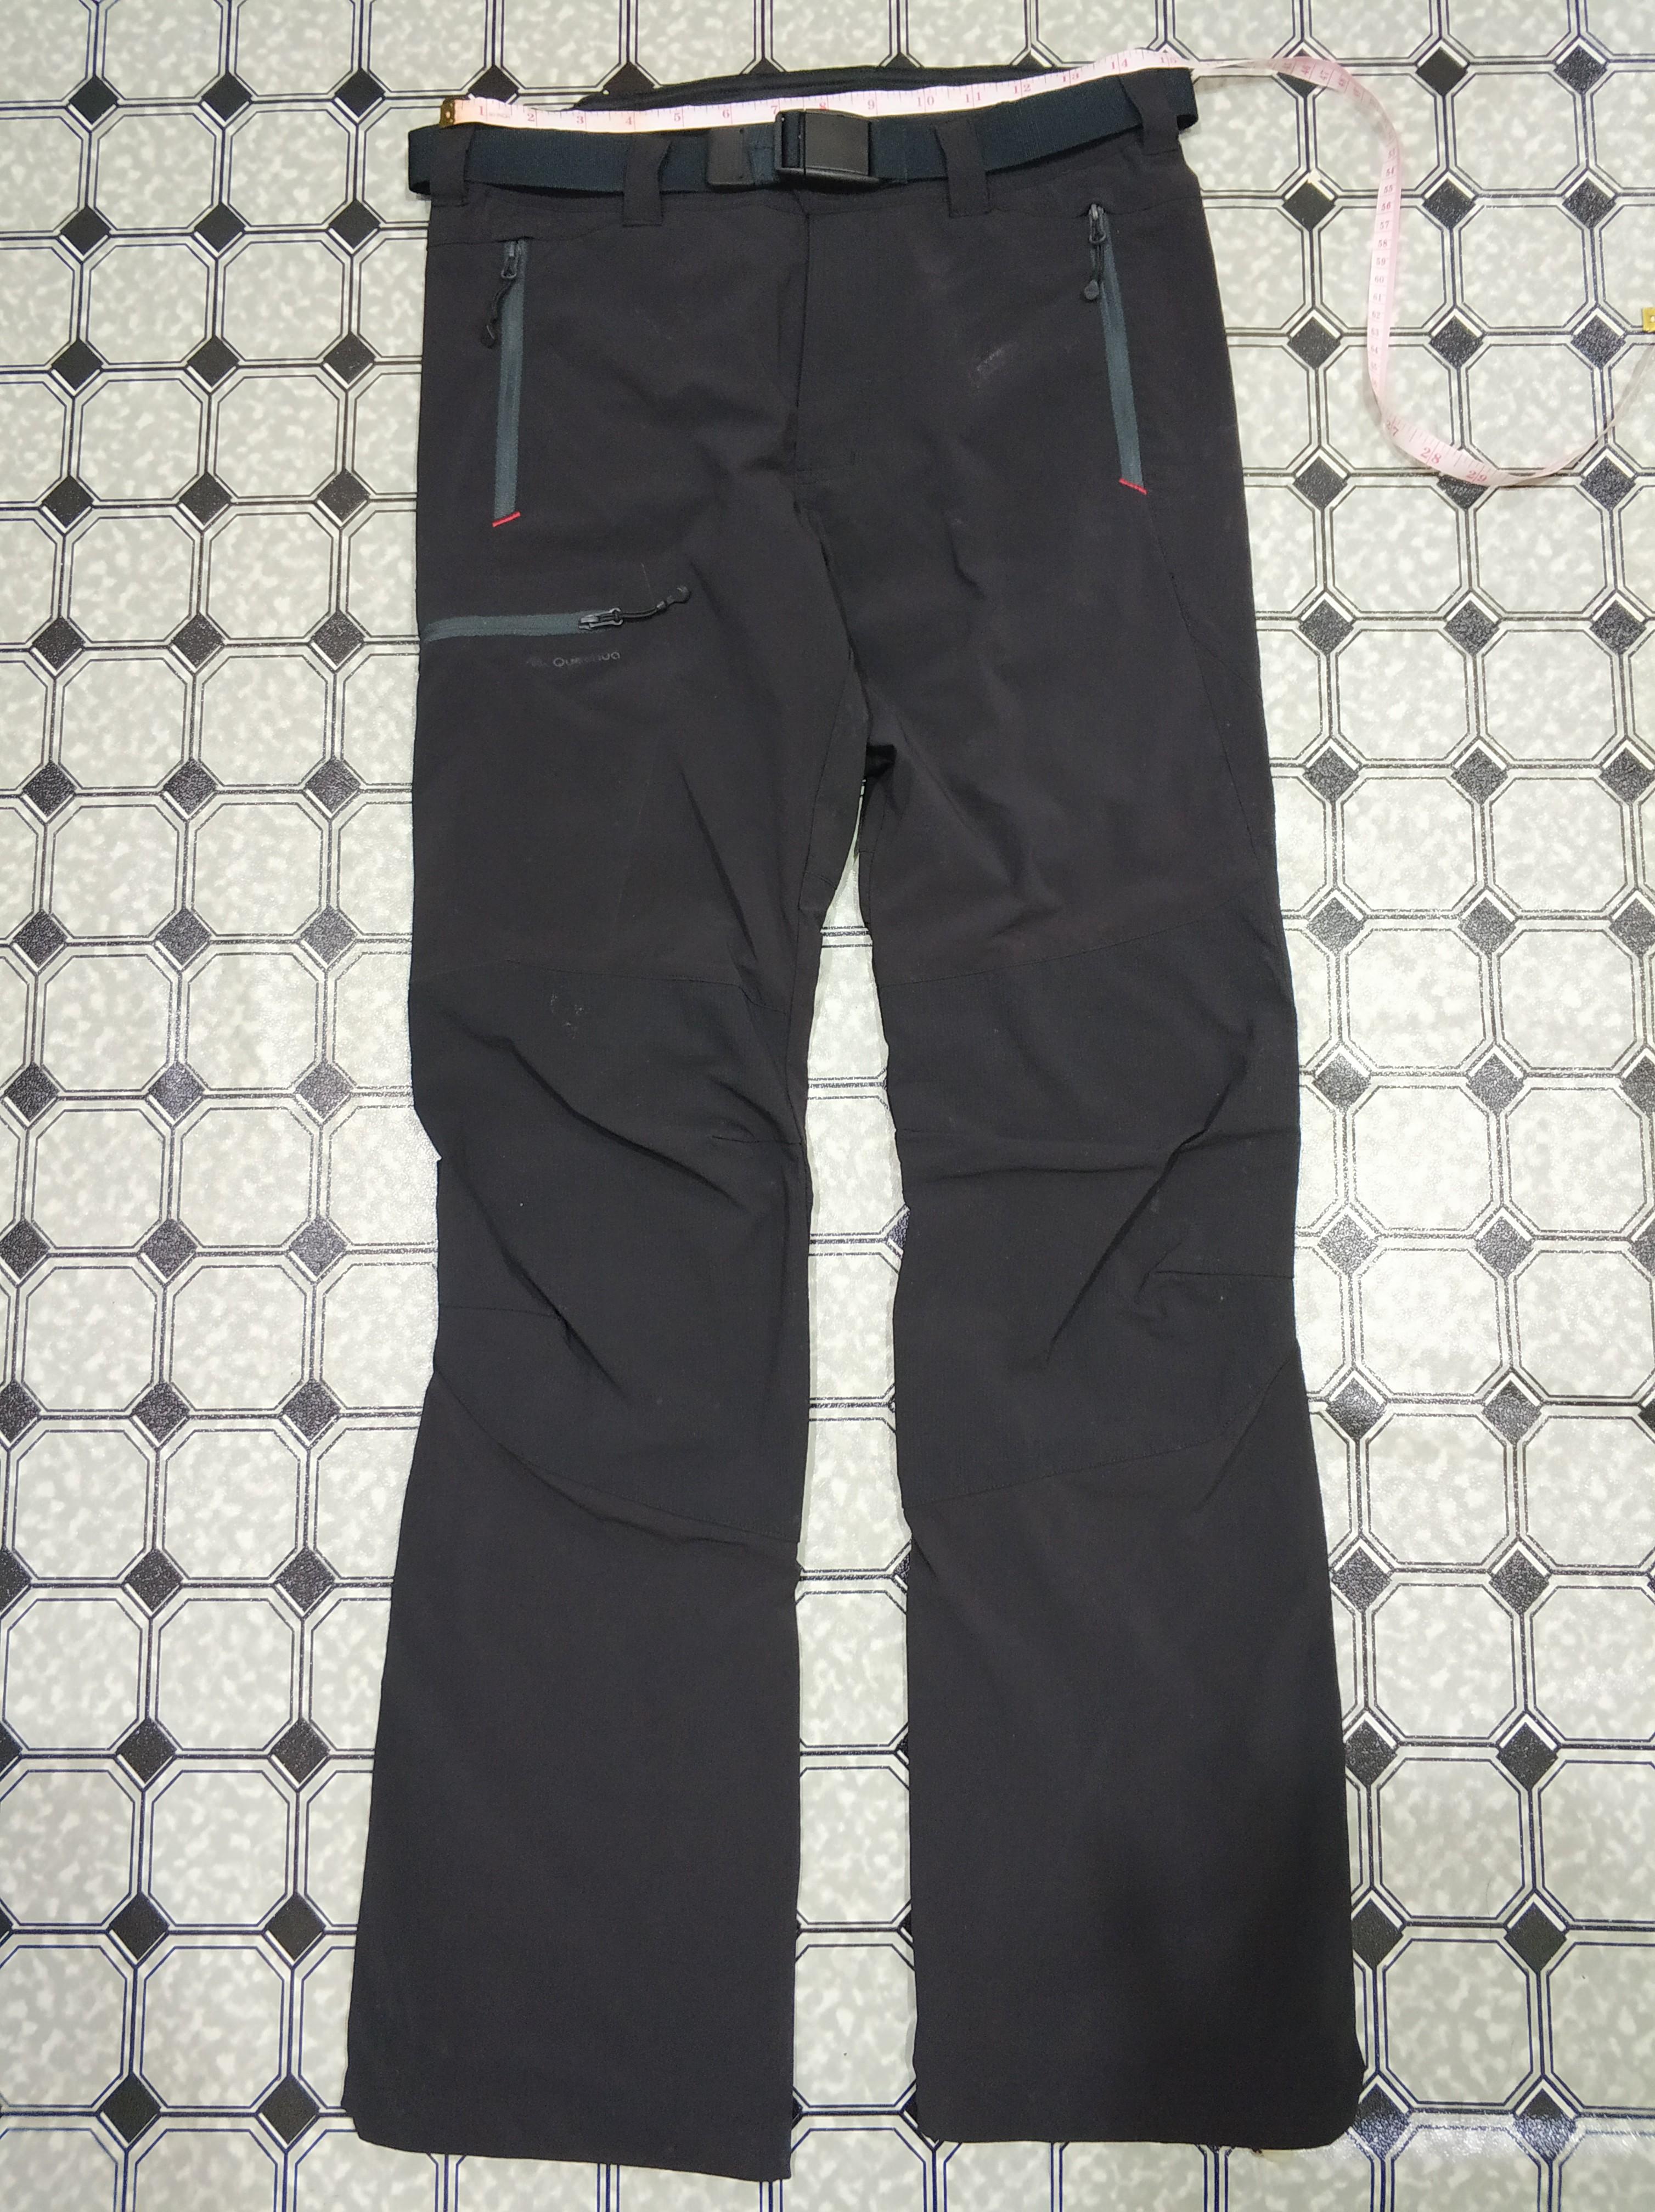 Buy Cotton decathalon Track Combo Pants (Set of 2) Size M Black at Amazon.in